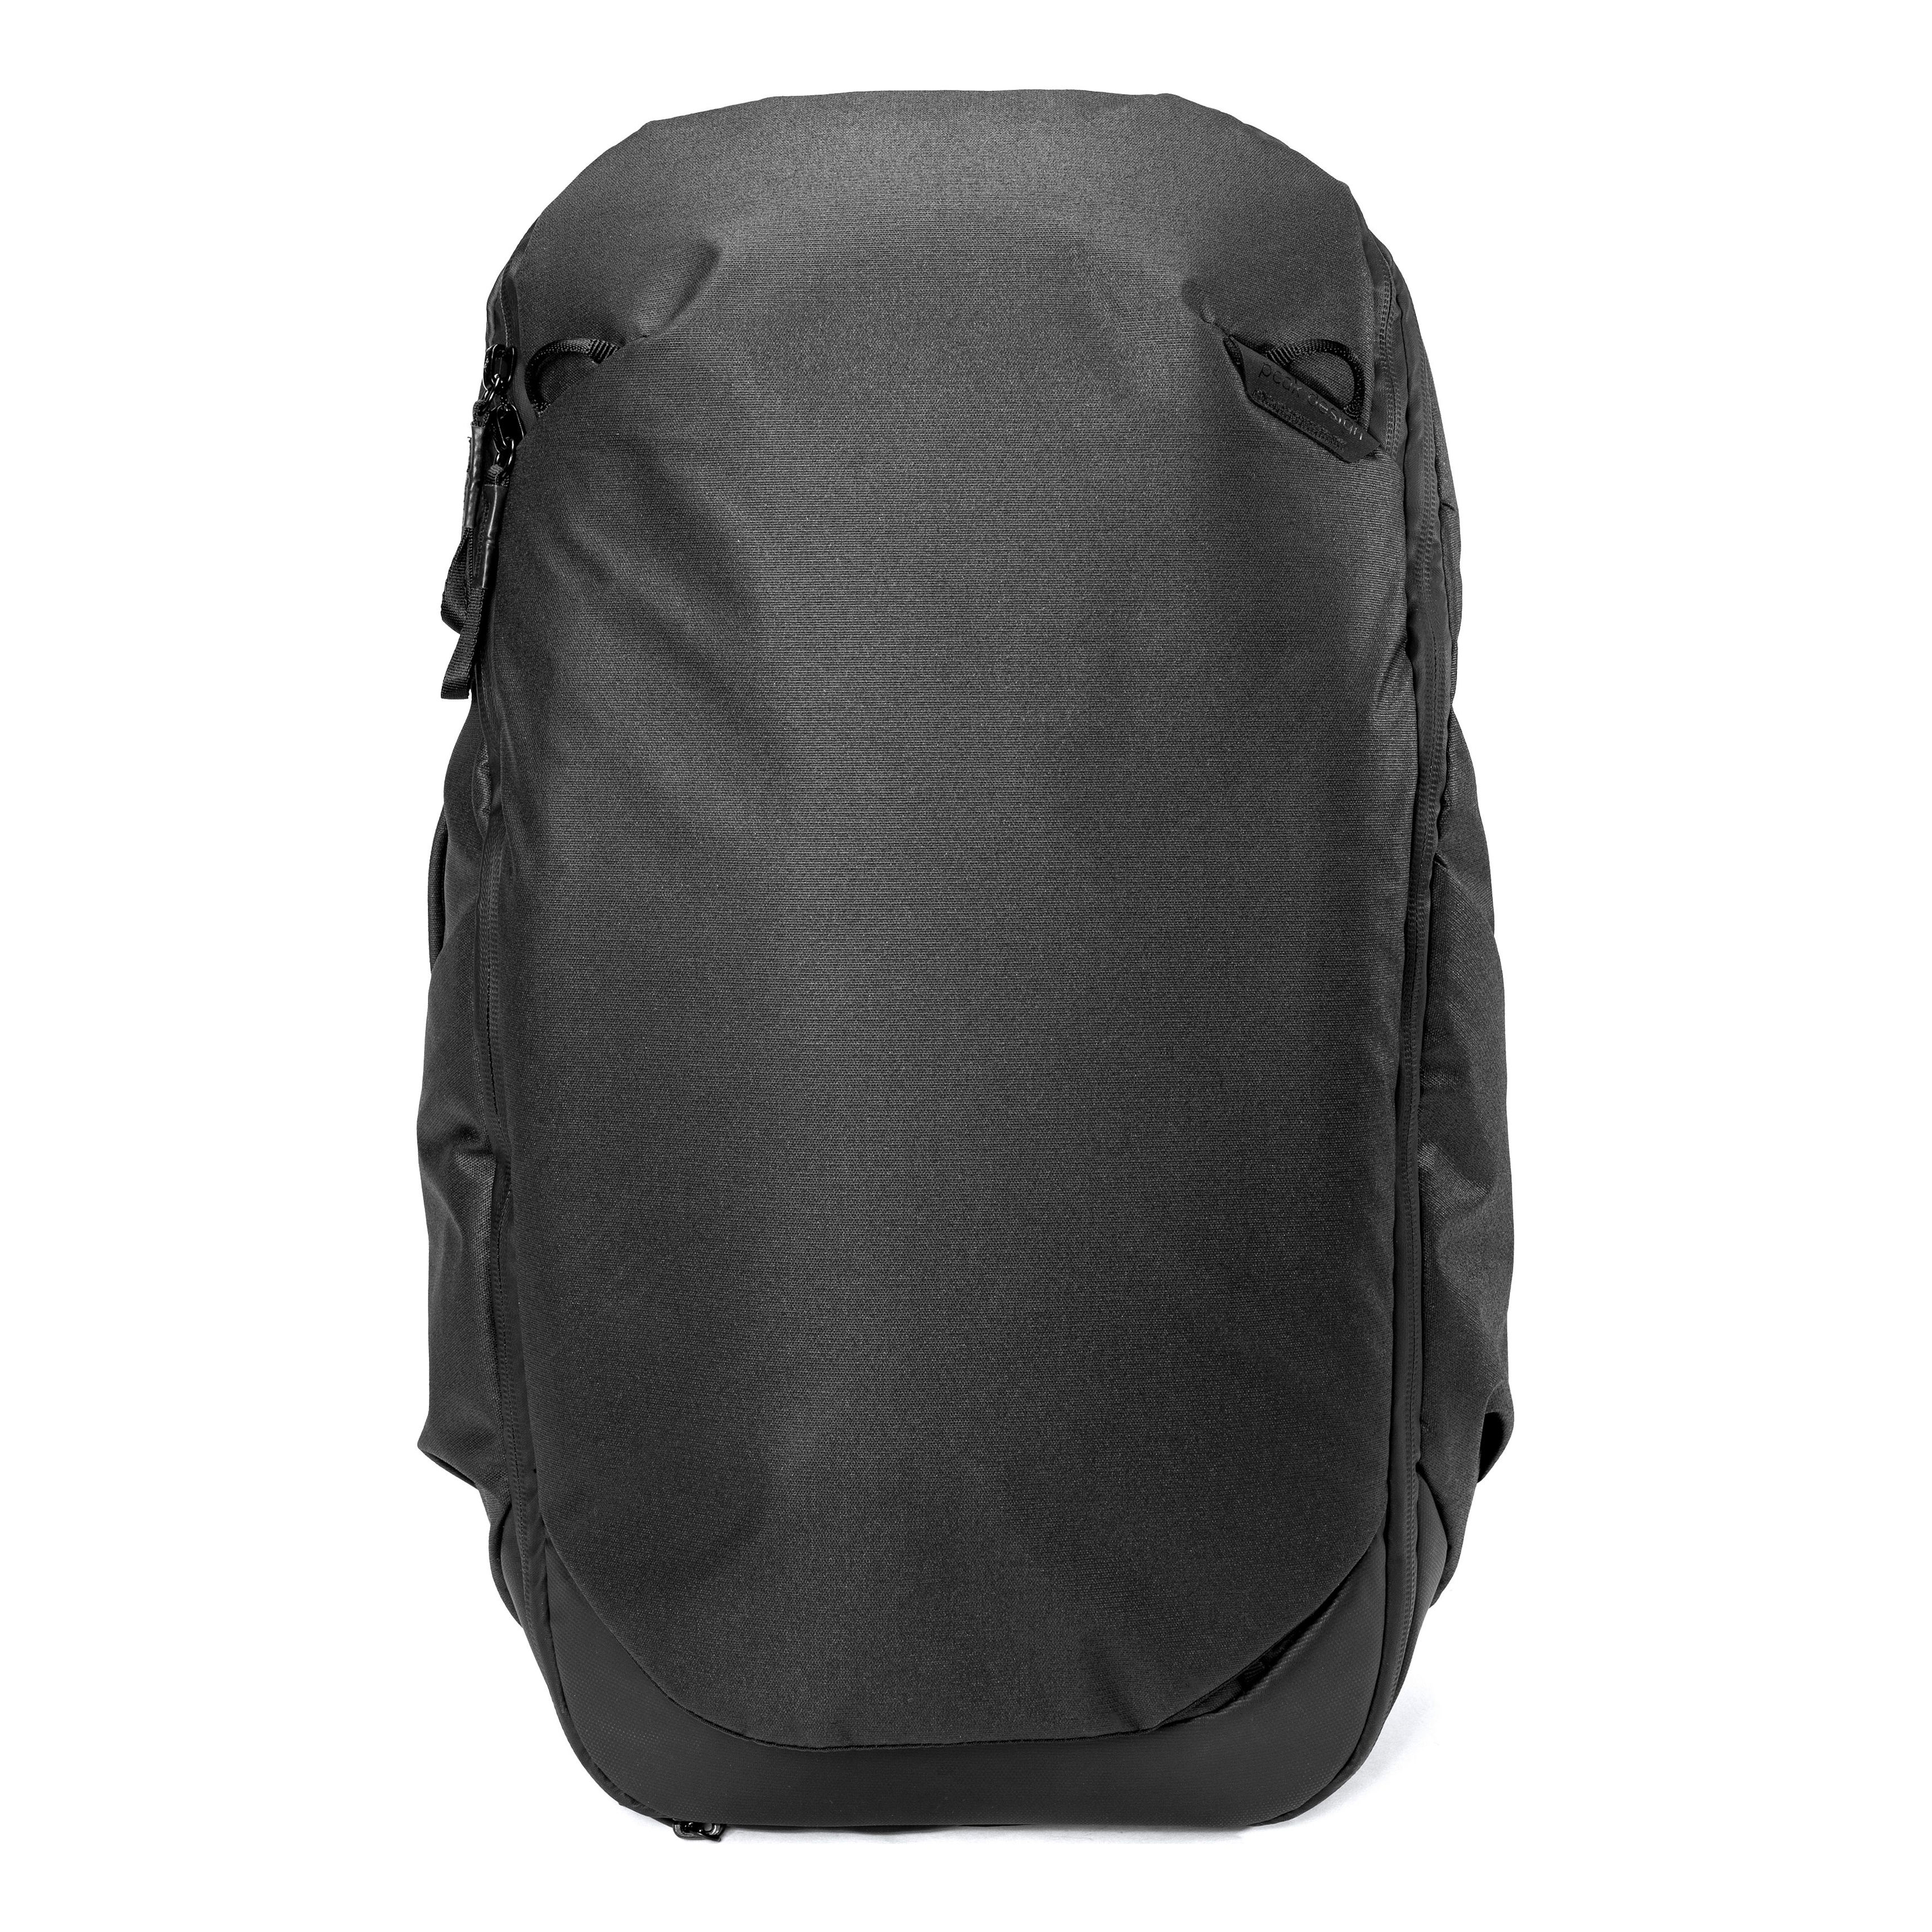 <p><strong>$230.00</strong></p><p><a href="https://go.redirectingat.com?id=74968X1553576&url=https%3A%2F%2Fhuckberry.com%2Fstore%2Fpeak-design%2Fcategory%2Fp%2F74401-travel-backpack-30l&sref=https%3A%2F%2Fwww.menshealth.com%2Ftechnology-gear%2Fg43294381%2Fbest-travel-backpacks%2F">Shop Now</a></p><p>We love the incognito look and simplicity of Peak Design's Travel Backpack. Aside from a top stash pocket, the bag relies on a single zipper that opens out the entire bag. From there, you can add in your clothes and shoes by themselves, or you can grab any of Peak Design's packing cubes and load in your electronics and gear. On the inside of the bag is also a deeply padded <a href="https://www.menshealth.com/style/g25896135/best-laptop-bags-for-men/">laptop</a> sleeve that keeps your devices tightly secured. Our favorite feature of the bag is the theft-proof zippers, which can be looped into each other when closed and help deter pickpocketers from quickly trying to open up your bag when in crowds.</p><p>As far as materials used, Peak Design went with 100% recycled 400D nylon canvas thanks to water and abrasion resistance. And in terms of comfort, padded shoulder pads, a generous adjustable strap length, and optional hip belt accessory help limit fatigue through a long day of travel. </p>